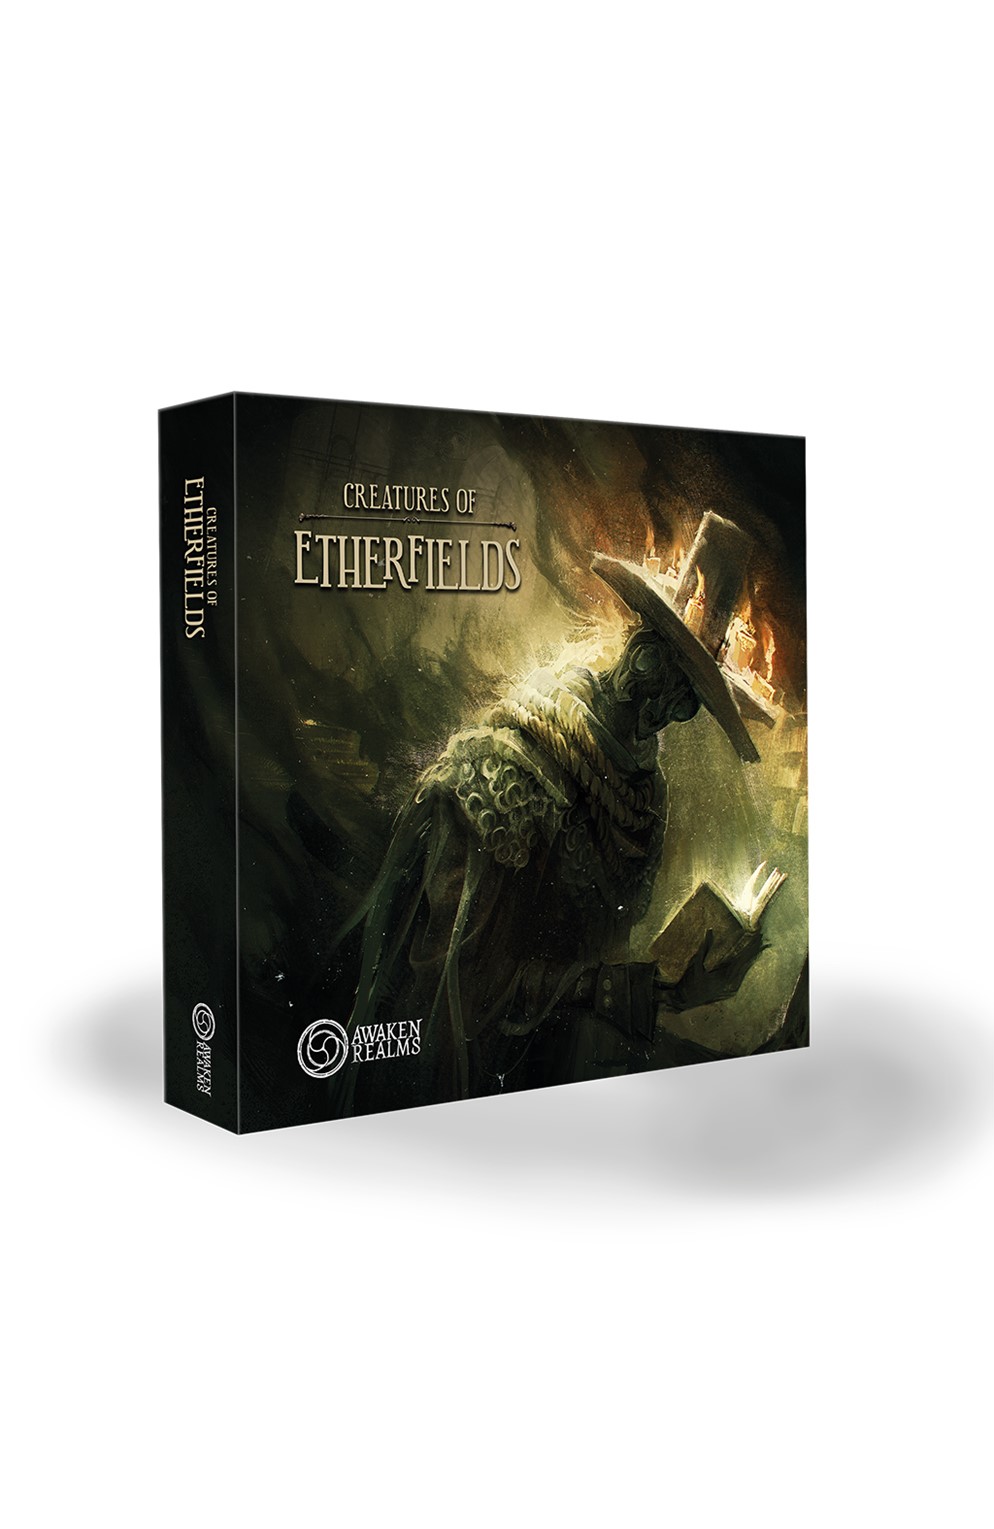 Etherfields: Creatures of the Etherfields